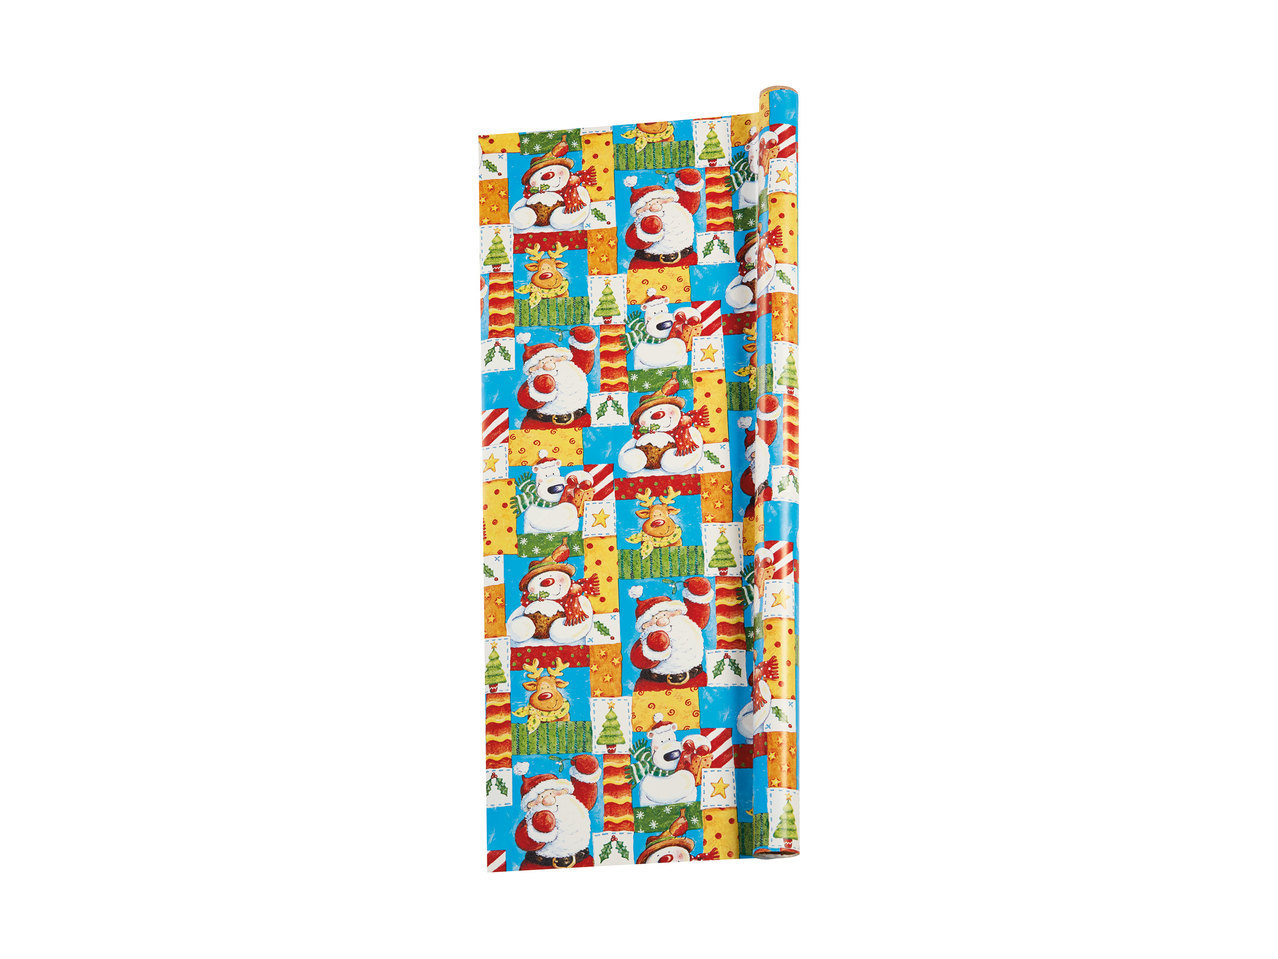 Melinera Wrapping Paper1